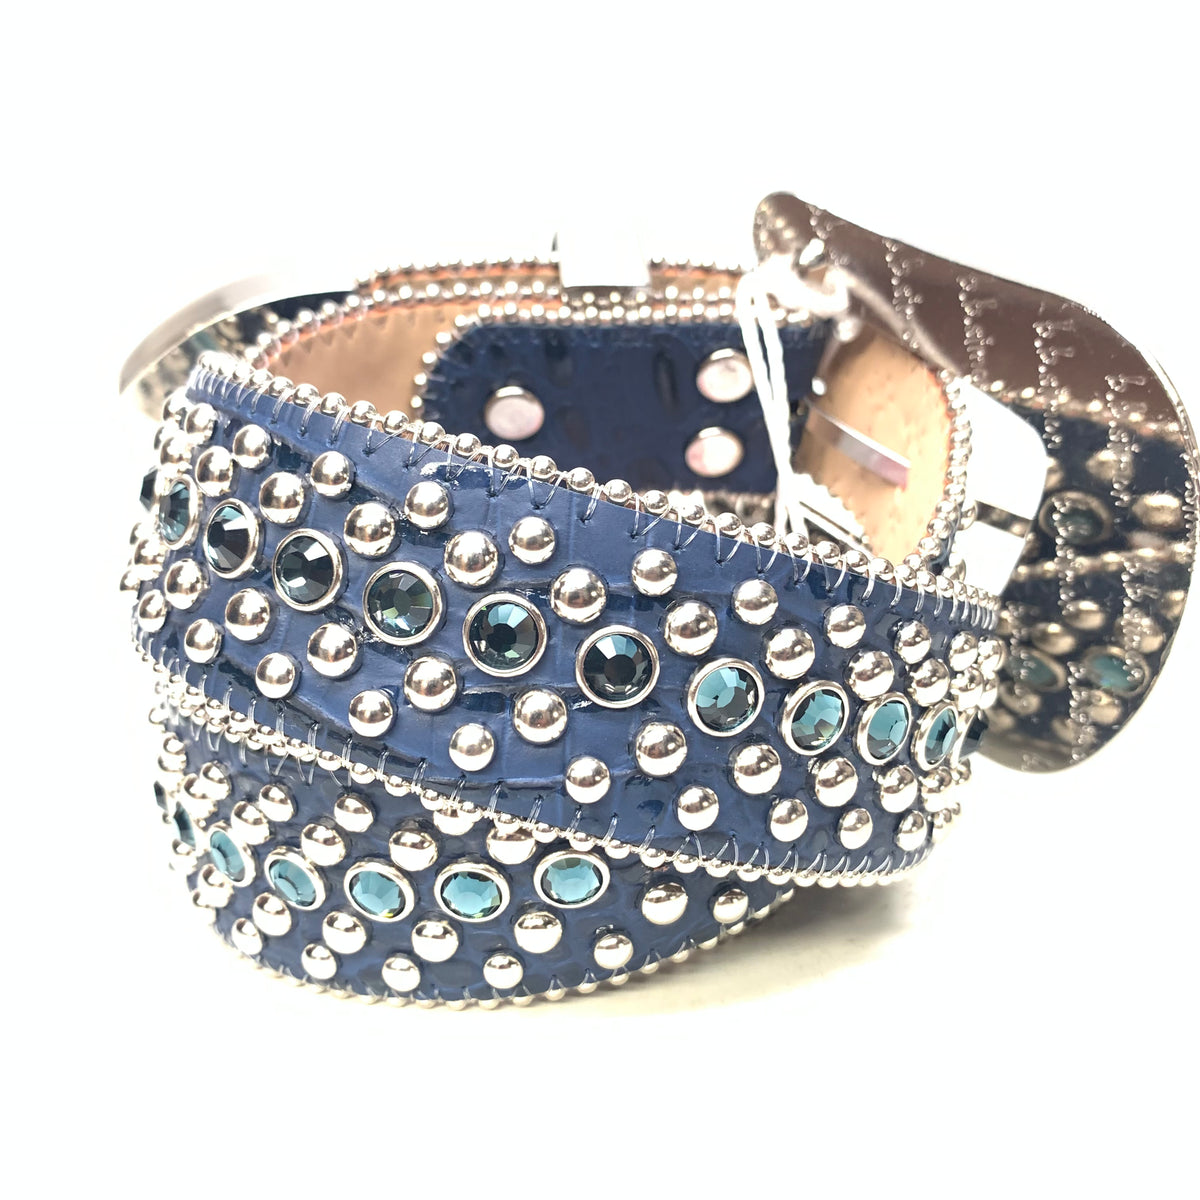 b.b. Simon Midnight Navy Fully Loaded Crystal Belt - Dudes Boutique